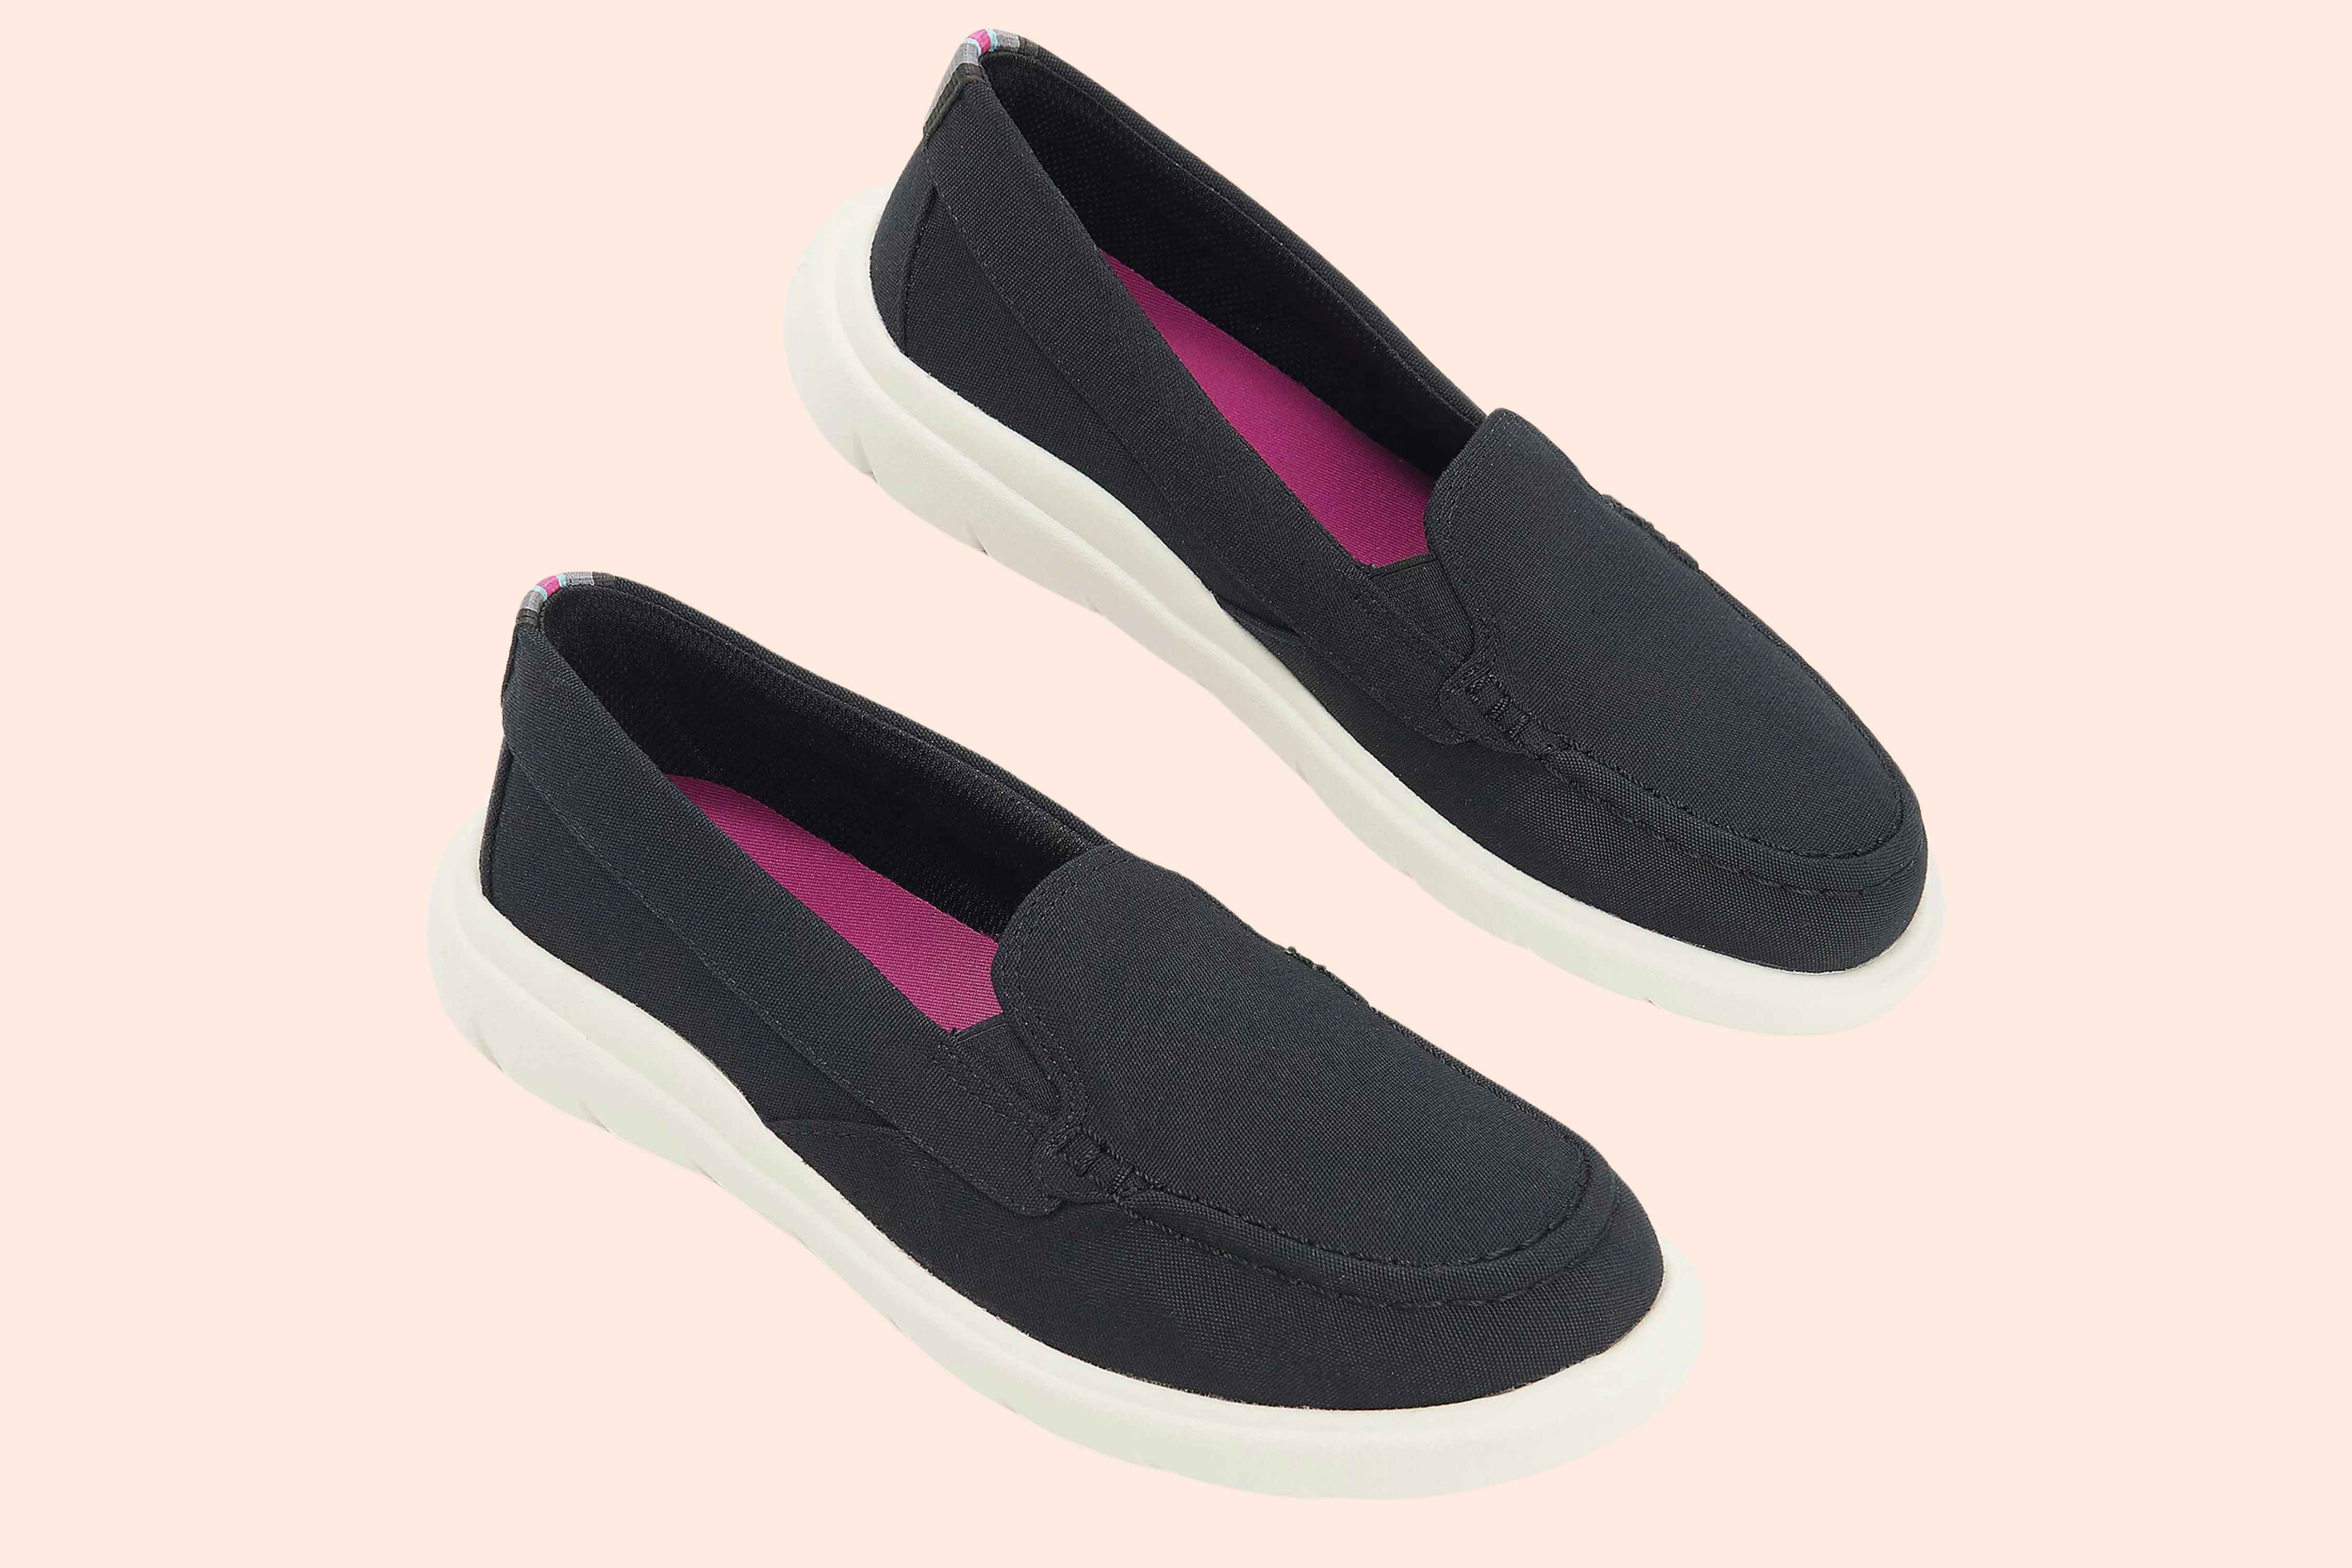 Sperry Upper Captain's Moc Slip-Ons, Only $21 Shipped at QVC (Reg. $70)